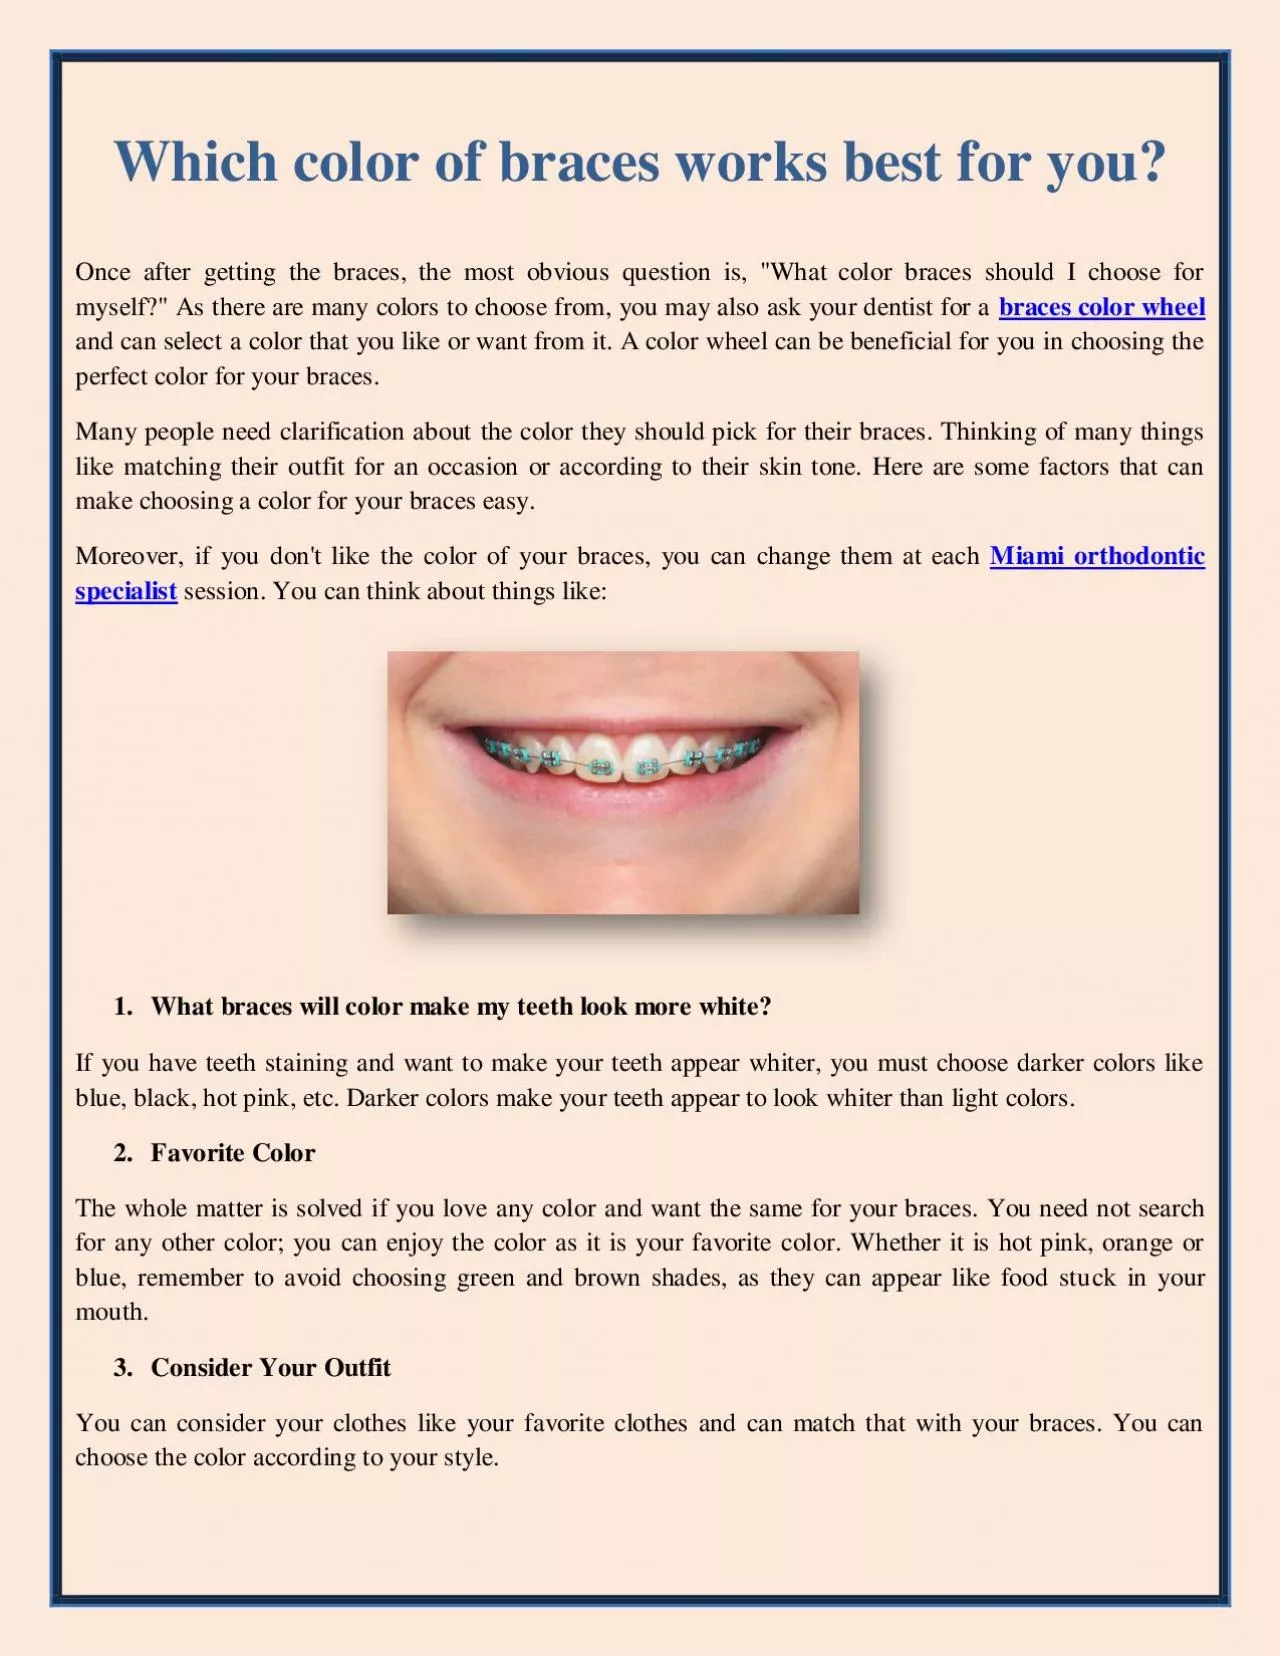 Which color of braces works best for you?